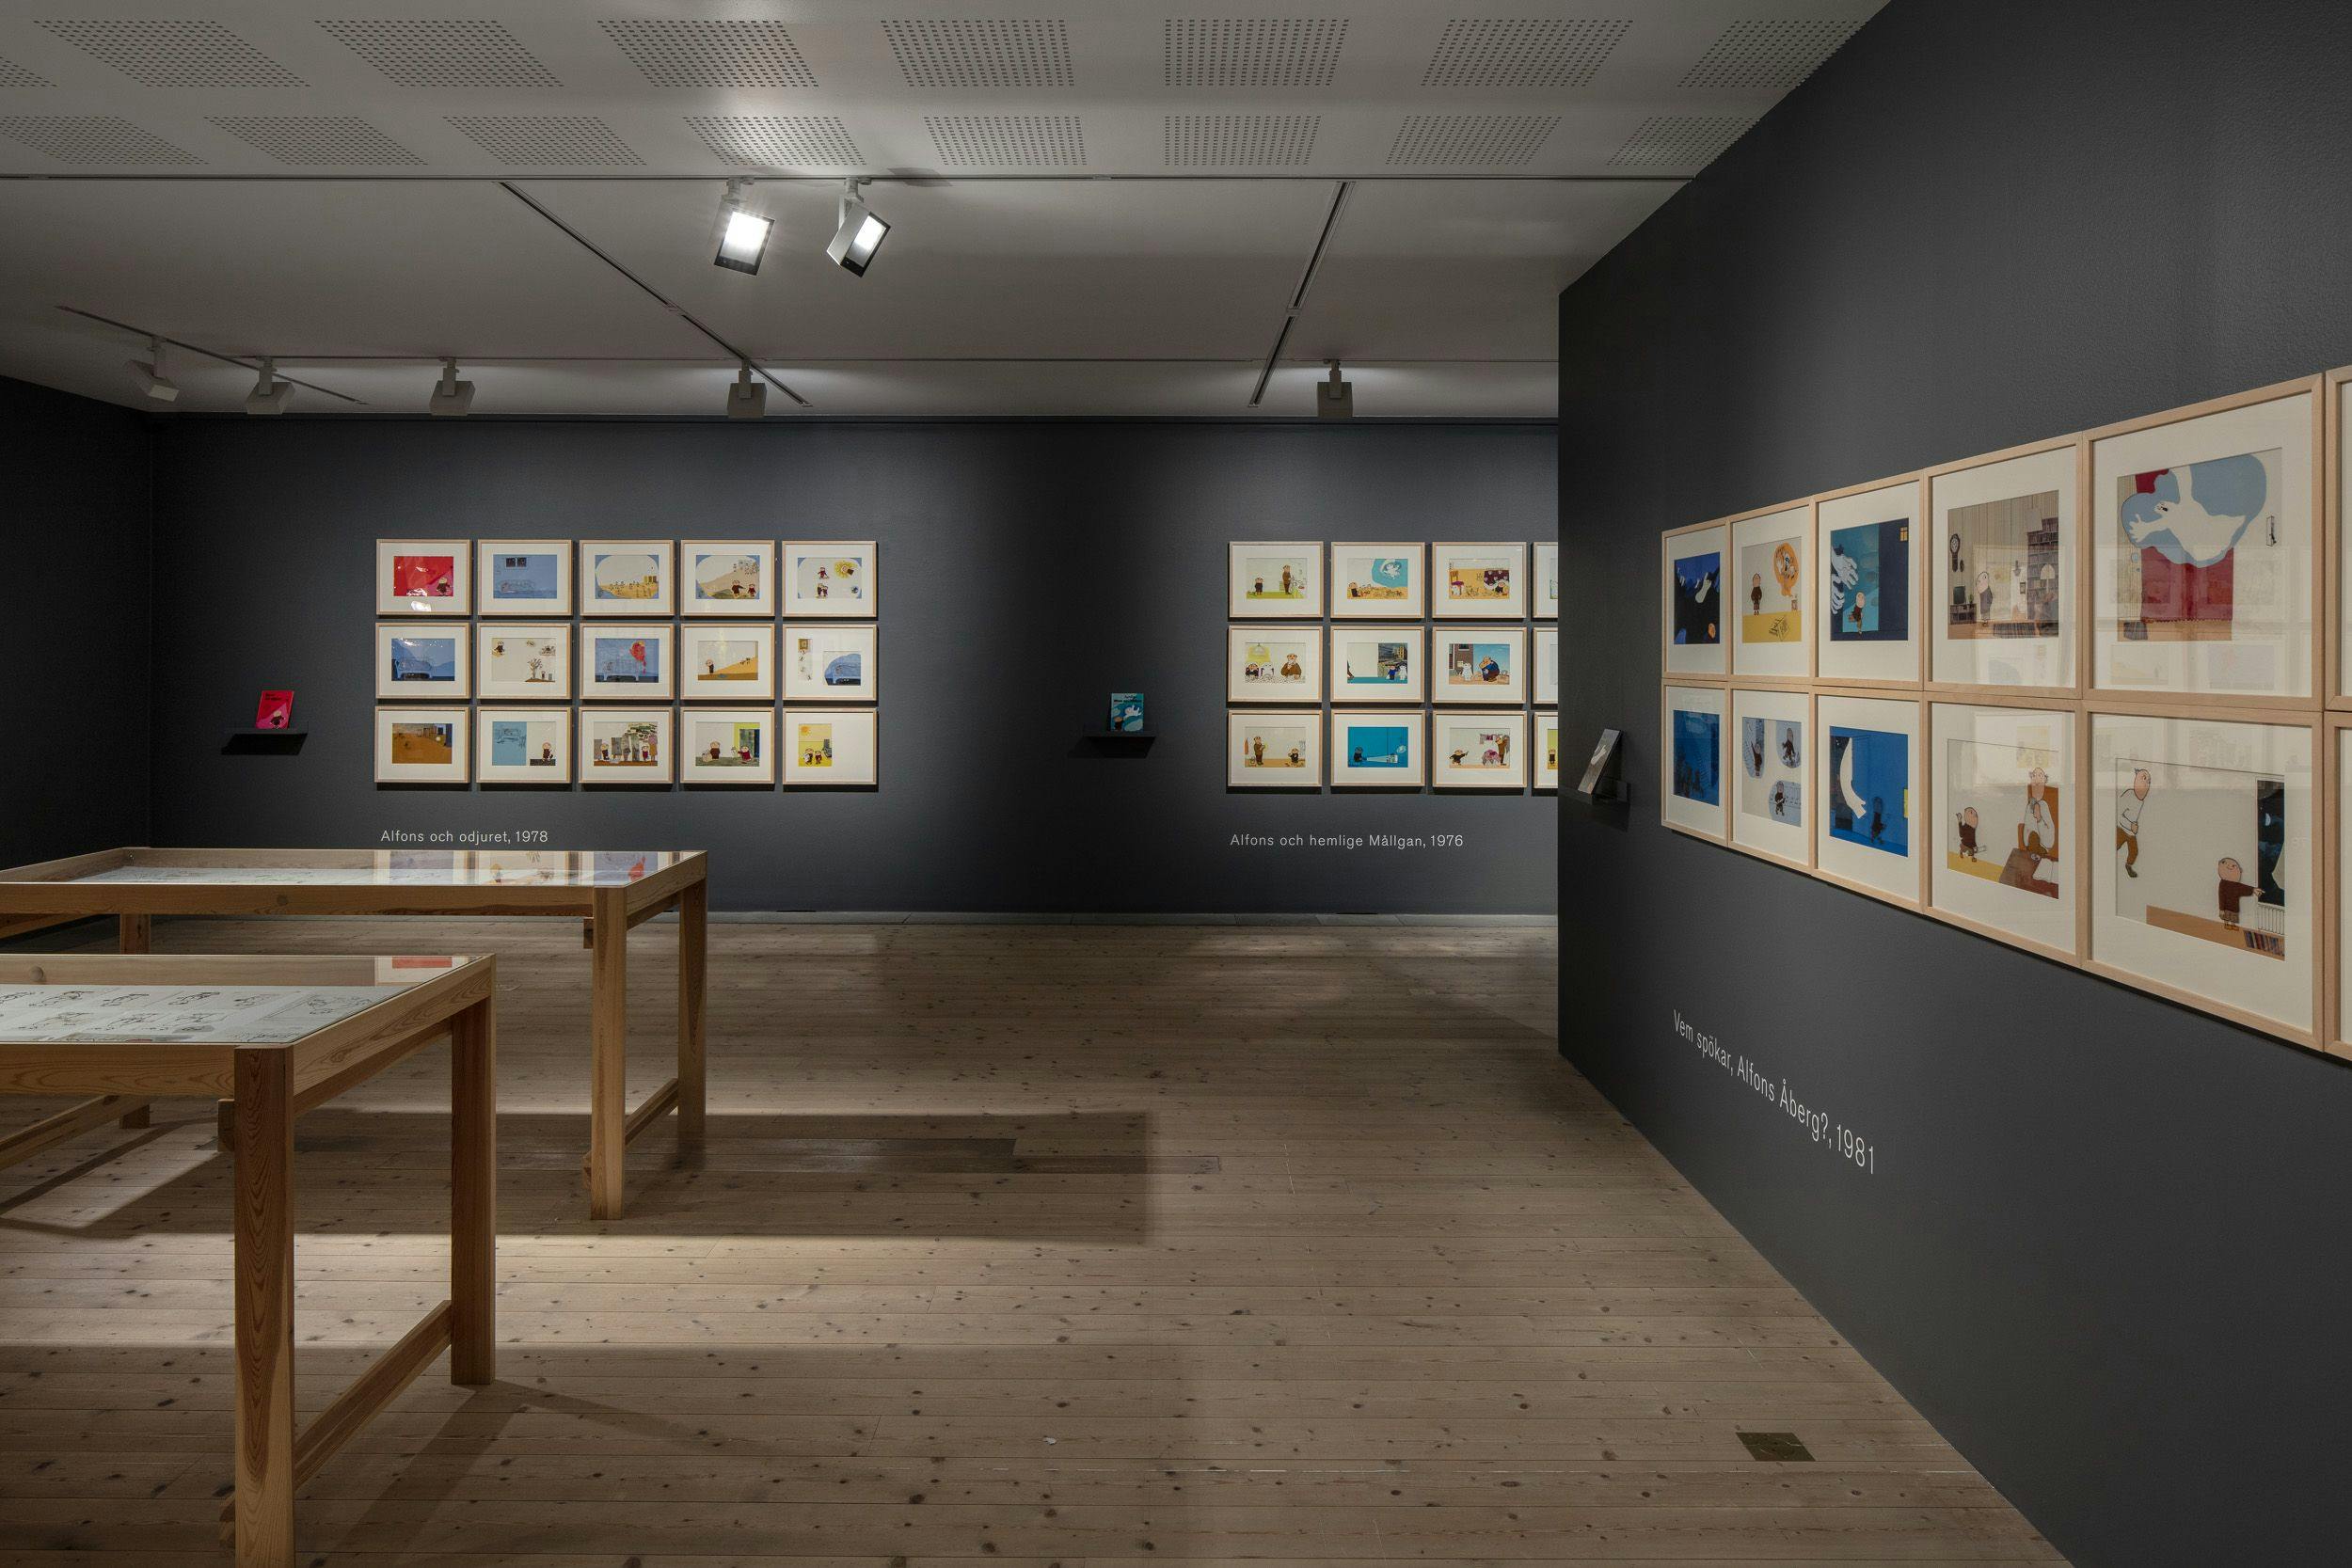 Photo of a room with pictures from Alfons Åberg on the walls and in two showcases